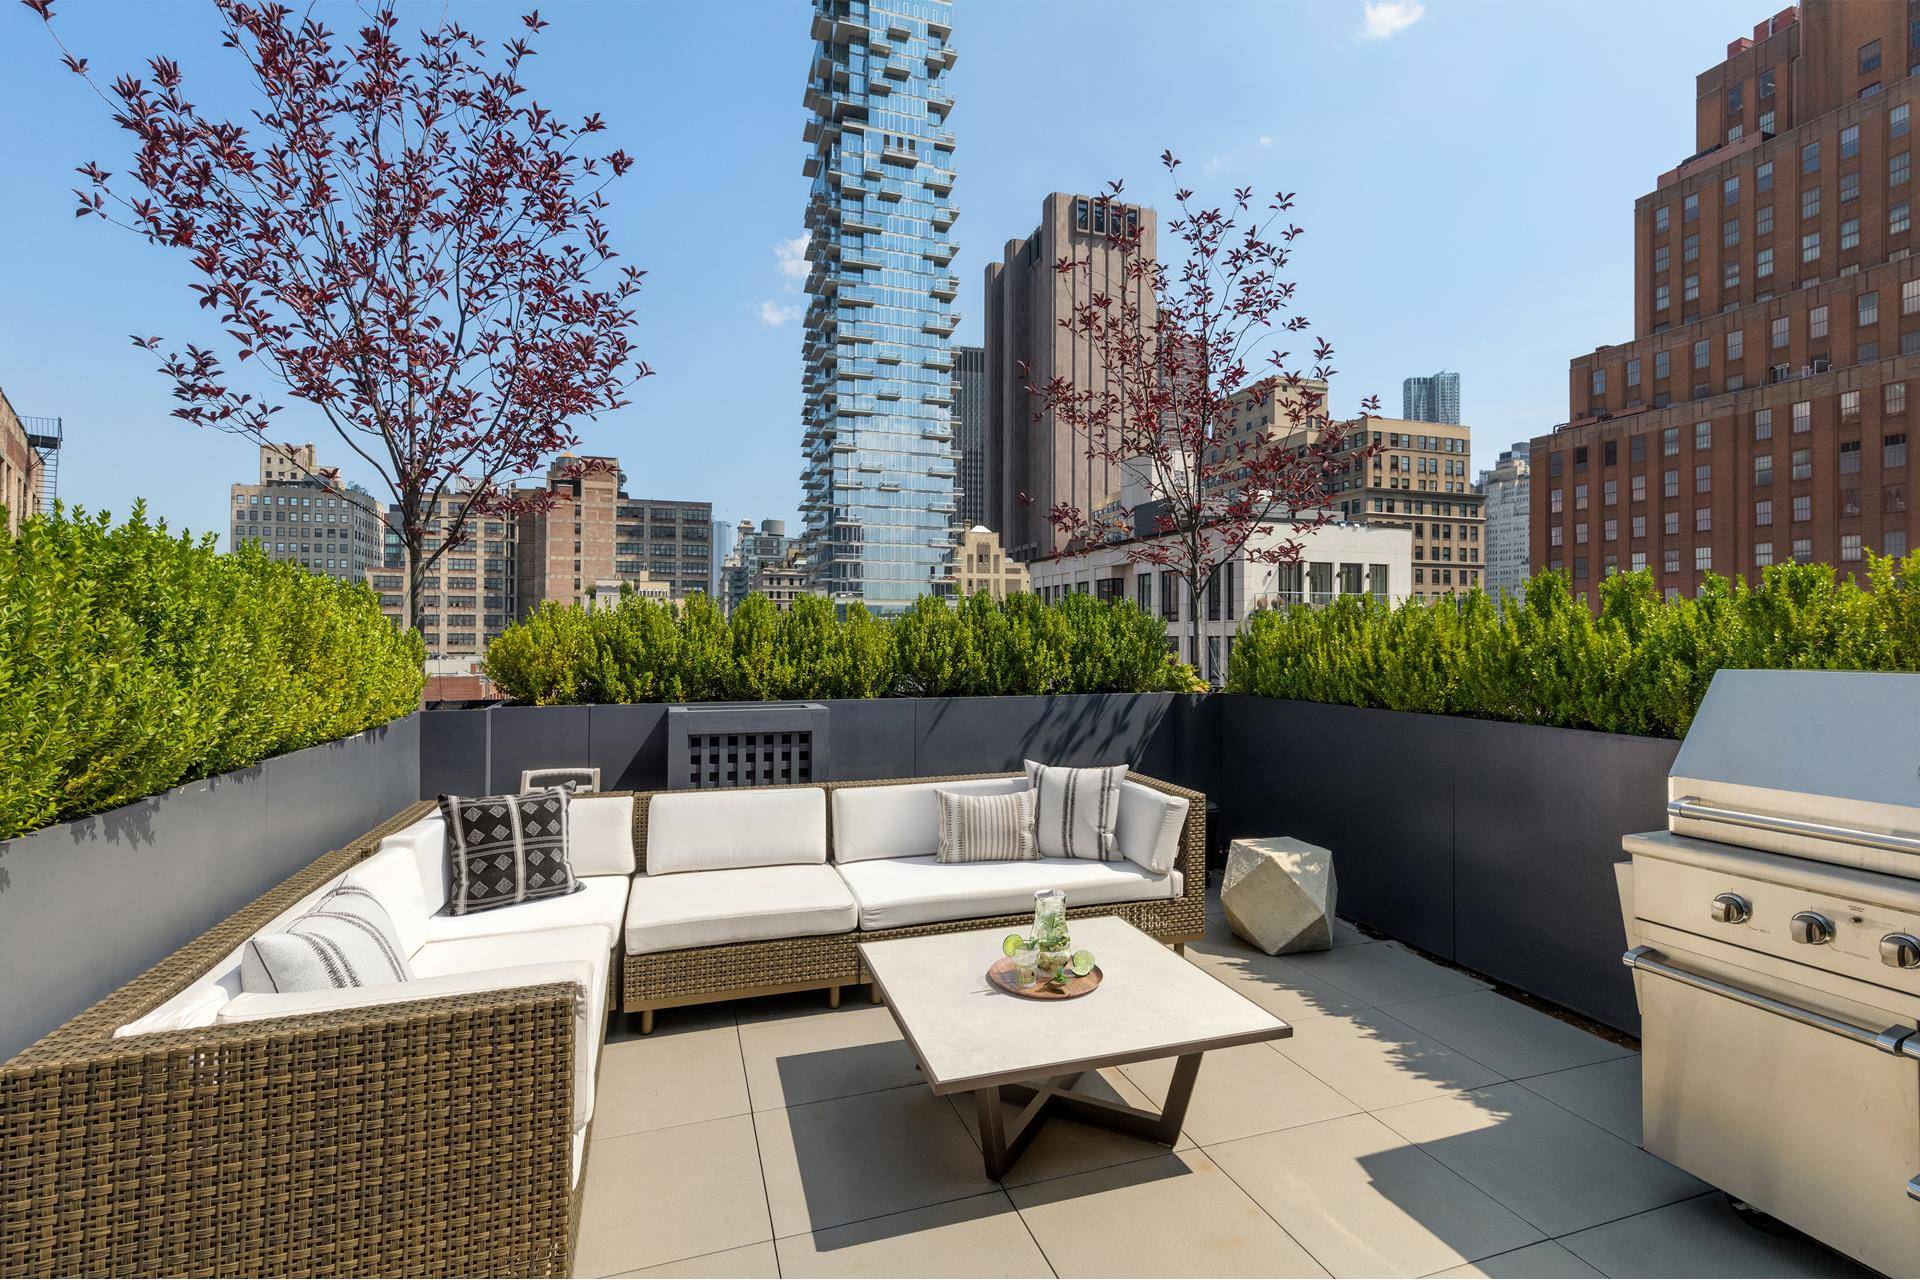 Unique, one of a kind, stunning Tribeca 3 story Penthouse in boutique condo building.